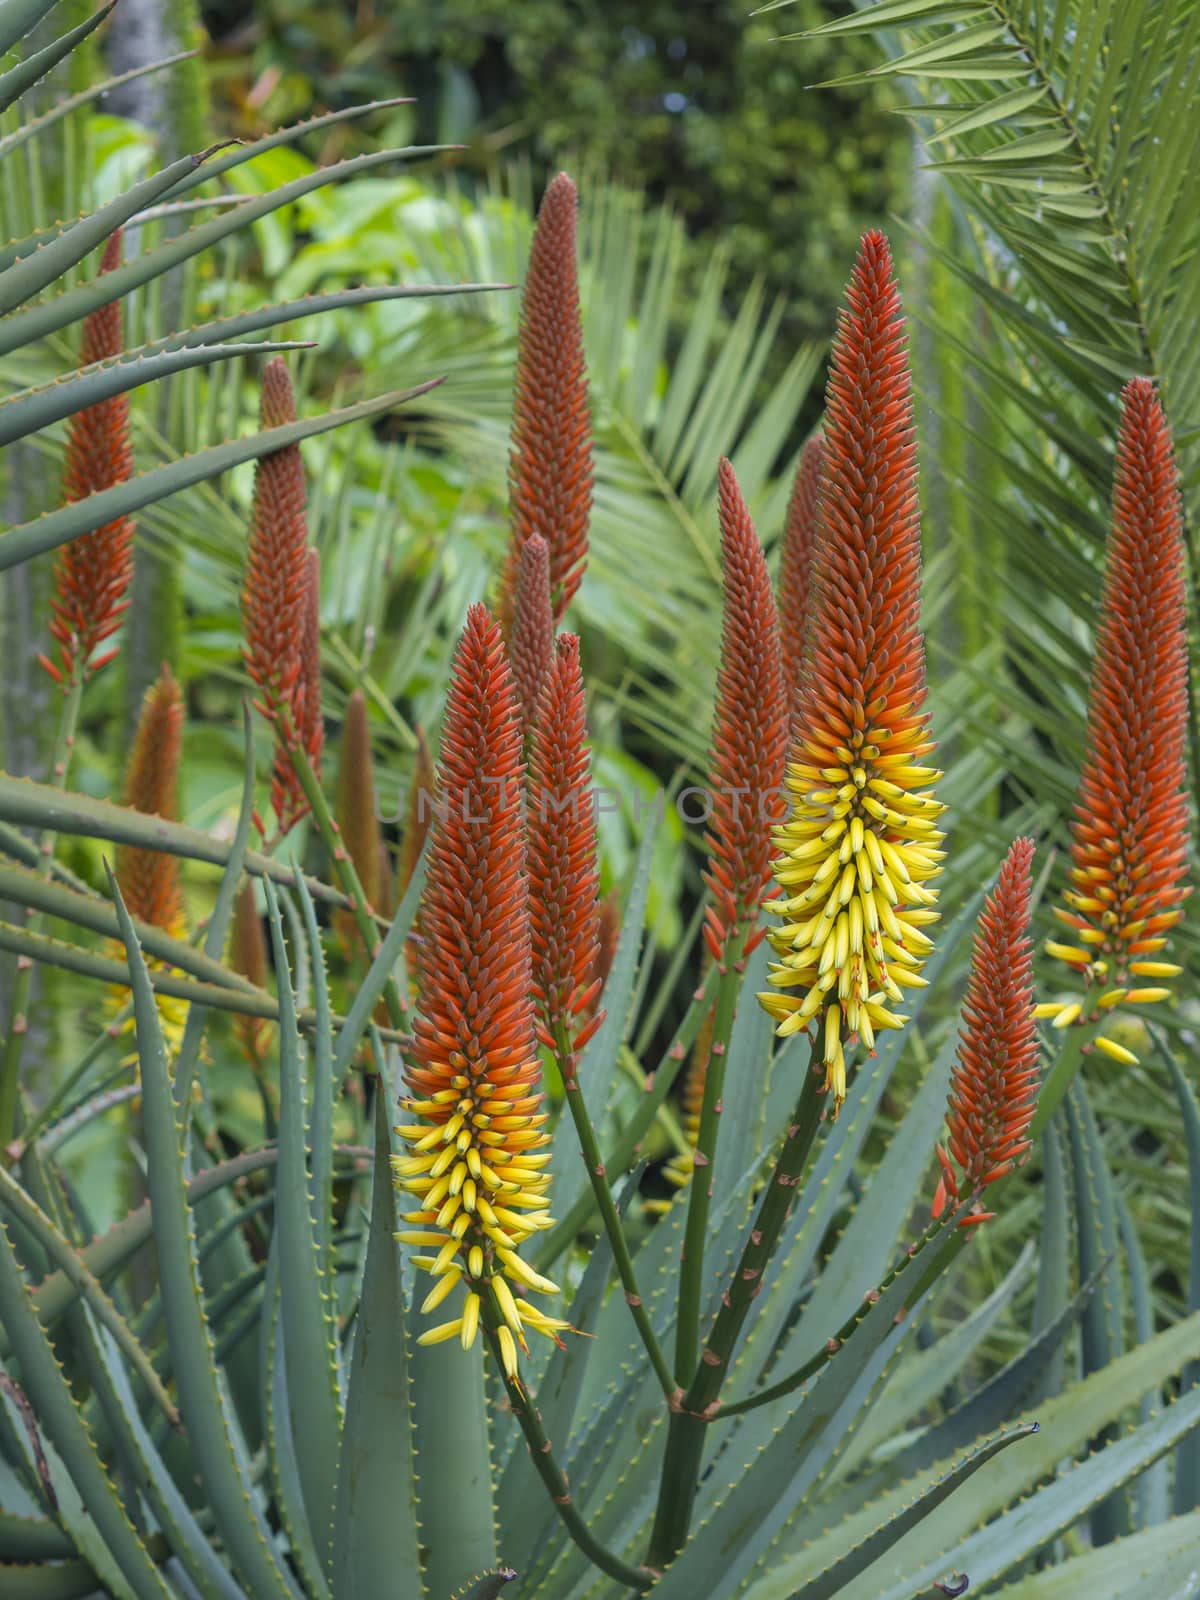 group of red and yellow blooming candelabra aloe flowers- Aloe arborescens in tropical botanical garden on Tenerife, selective focus